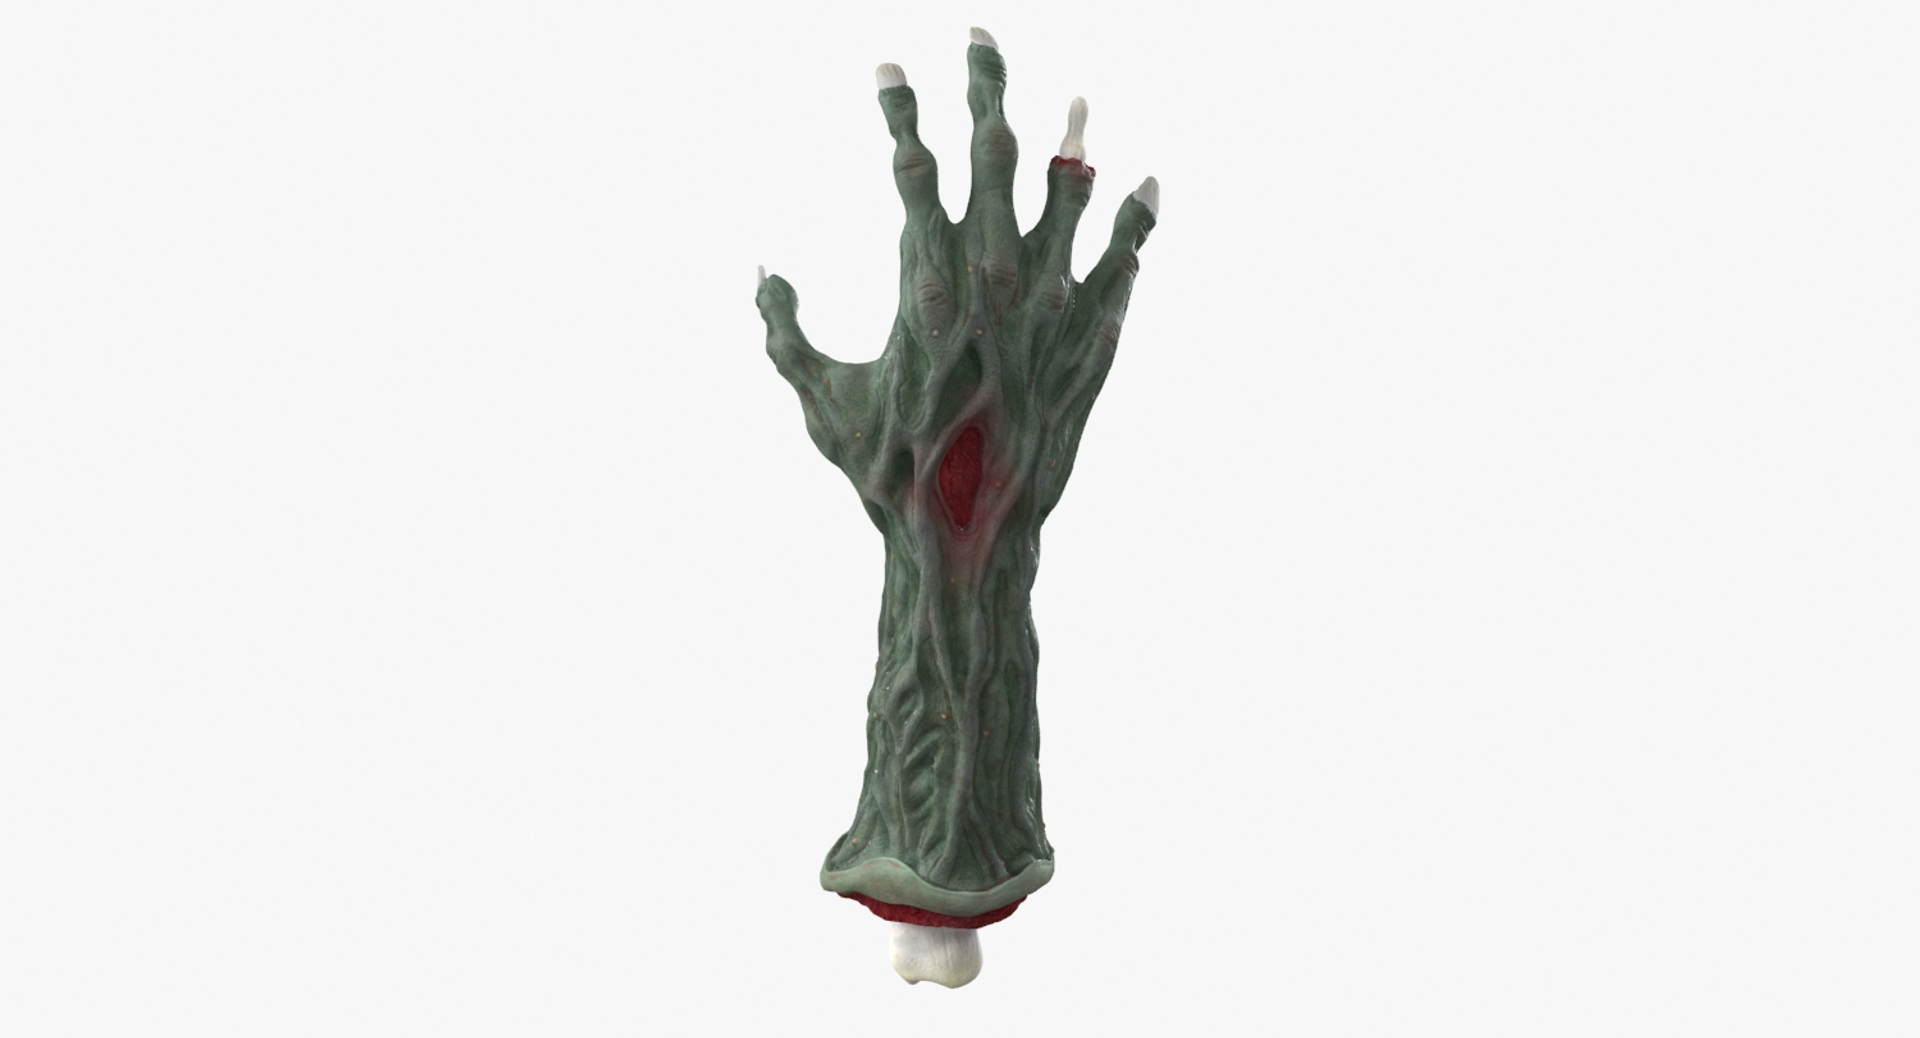 zombie hand png